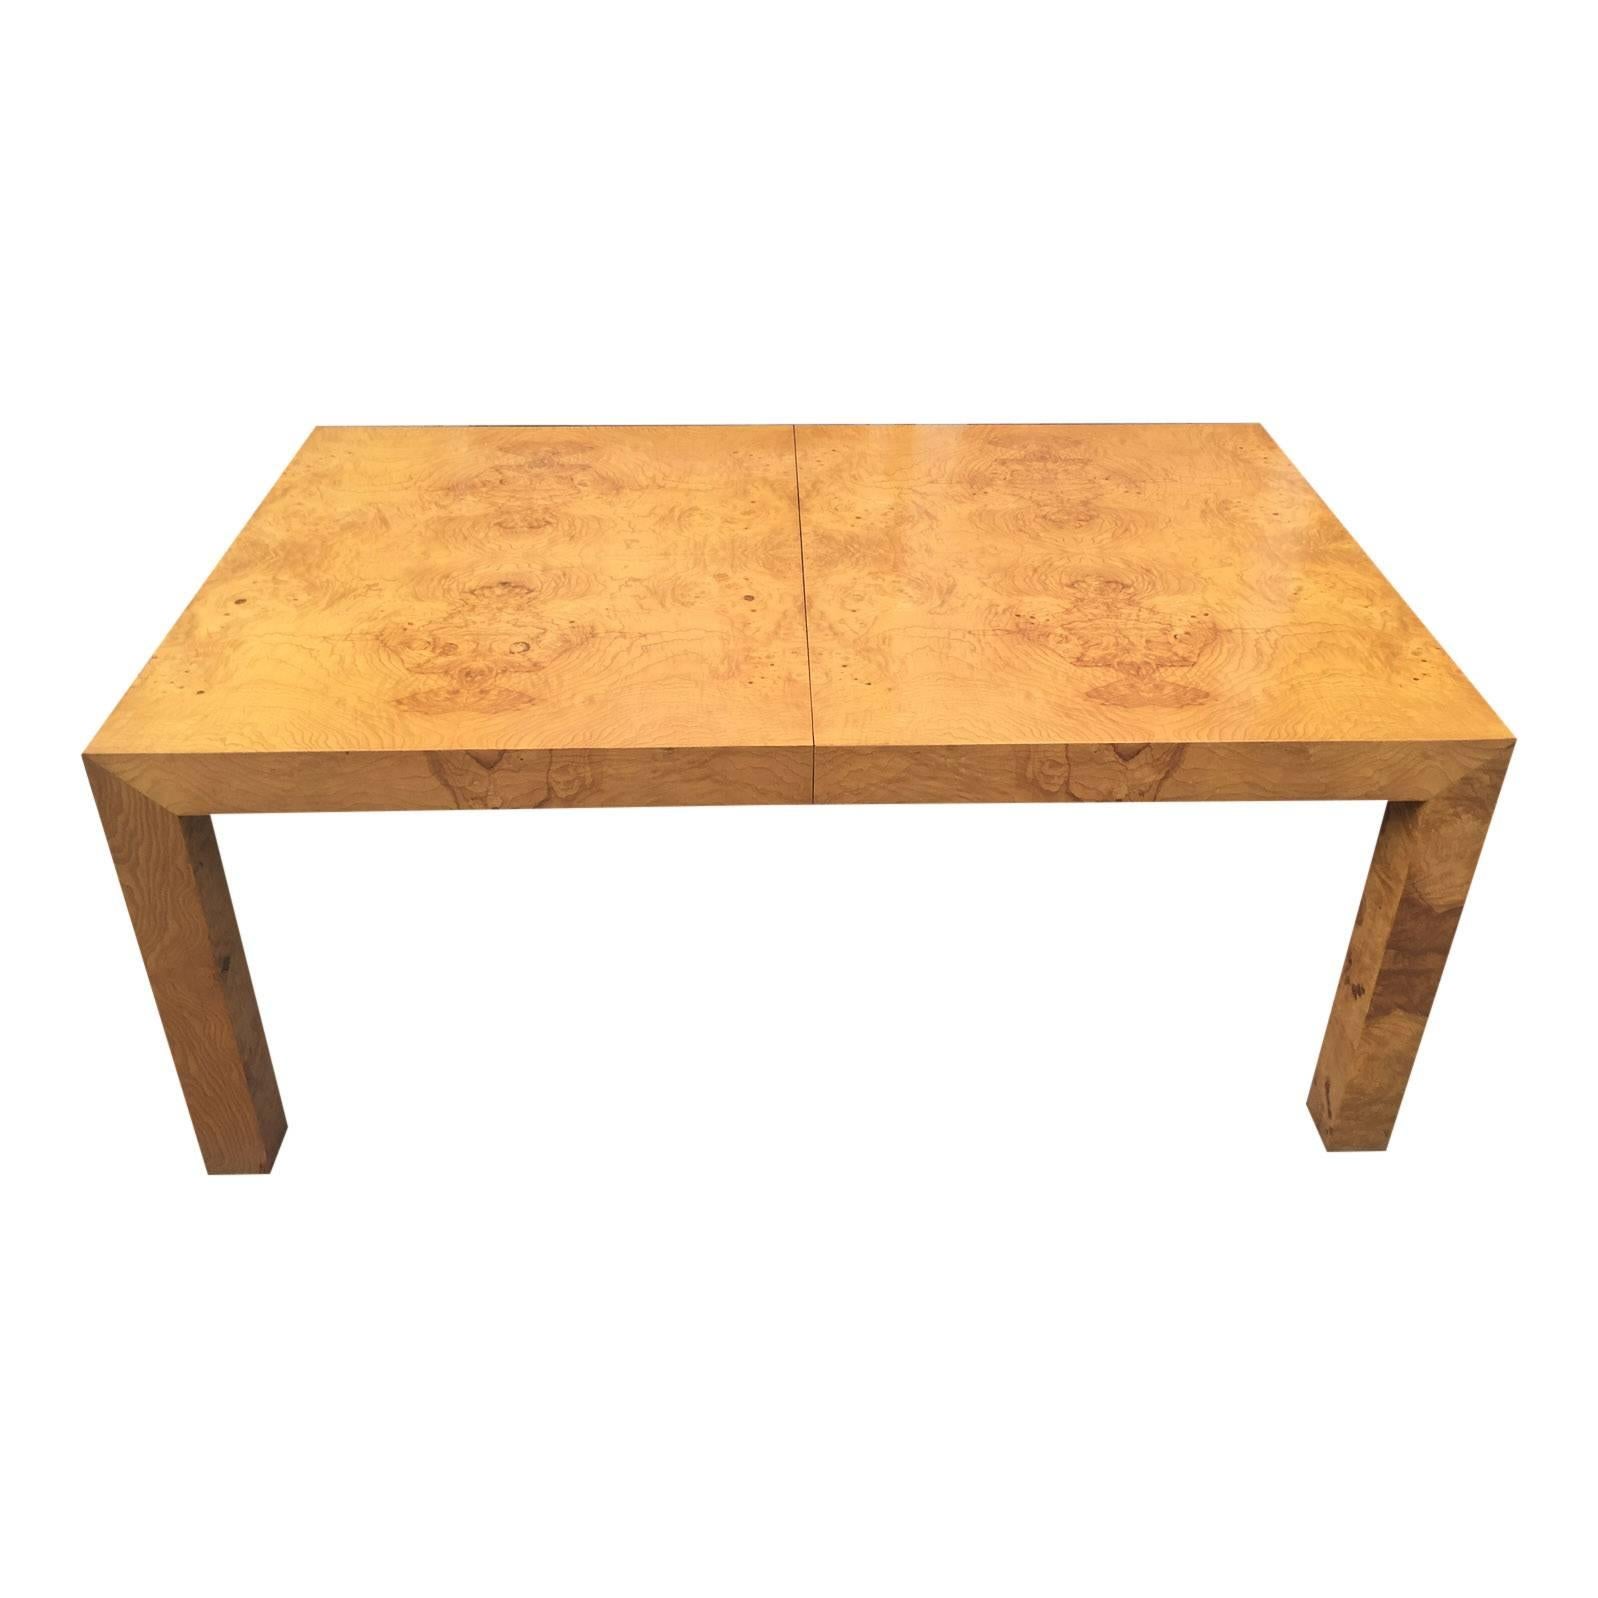 A perfectly-proportioned Parsons table by Milo Baughman, with two extension leaves. Highly figured burled olivewood. A great piece to give some pop to any room.

The table is in very nice vintage condition.

Dimensions: 28'' high, 39'' deep,